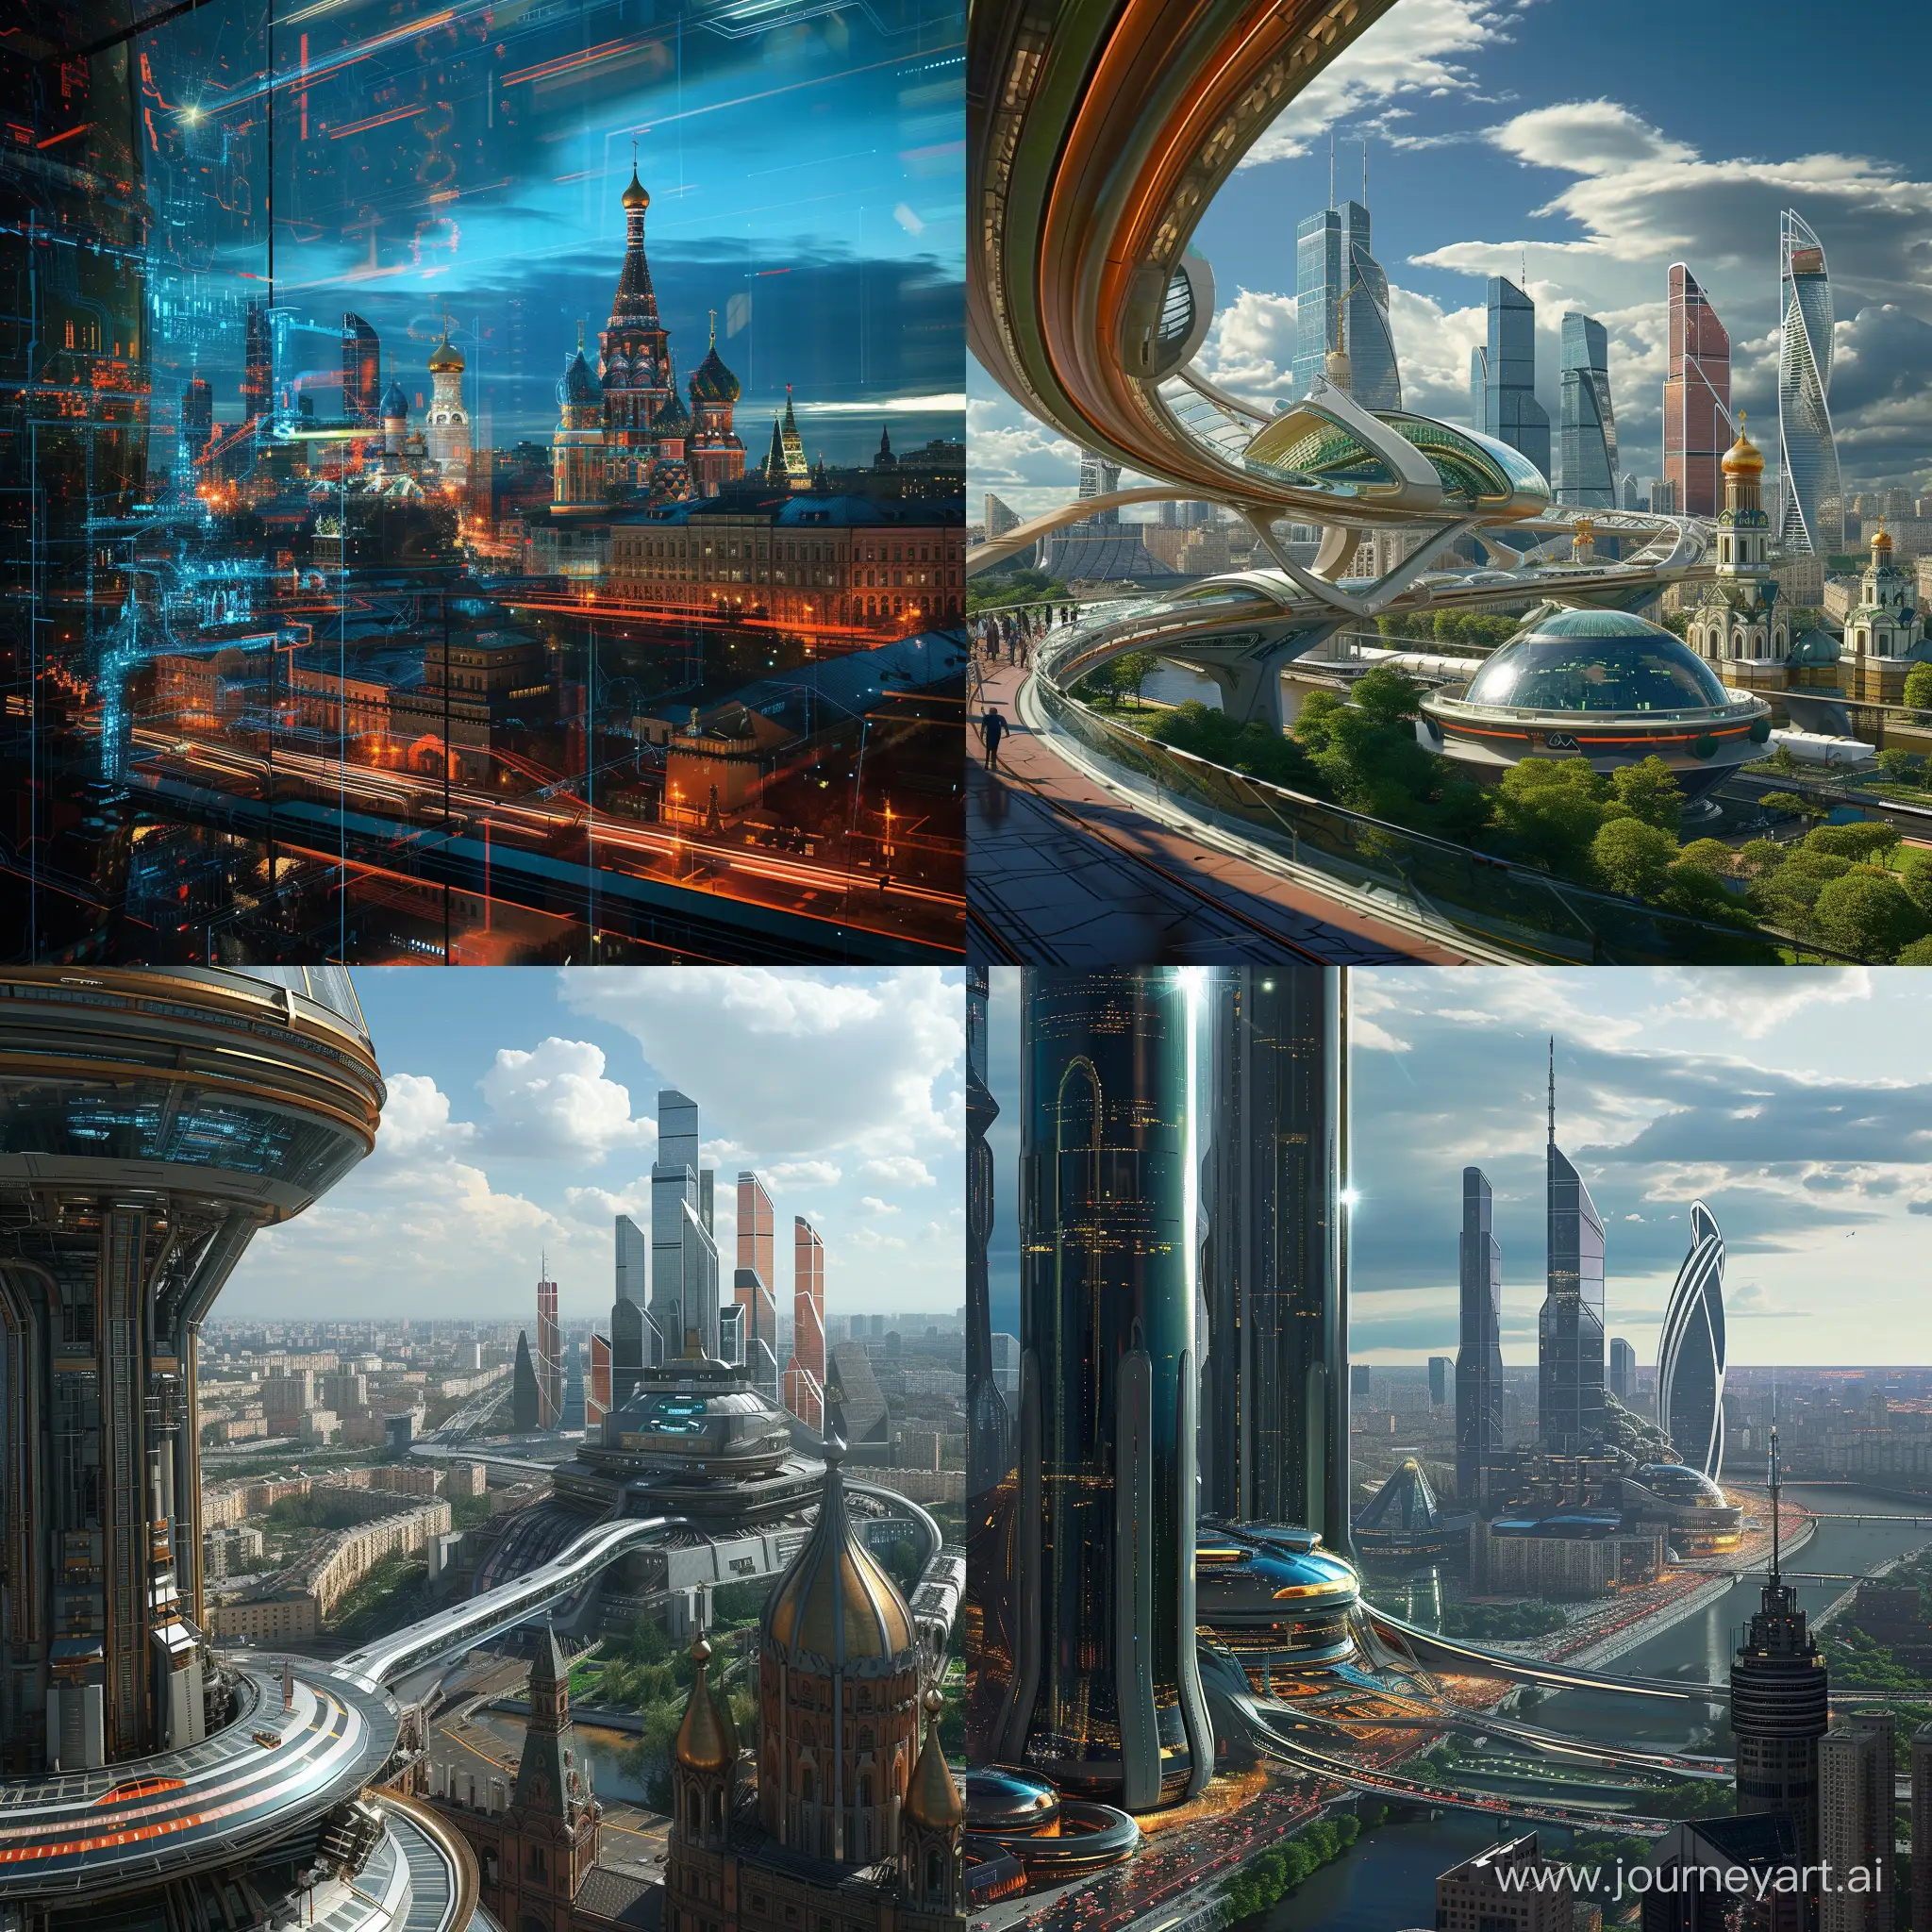 Futuristic-Moscow-Cityscape-in-Cinematic-HighTech-Style